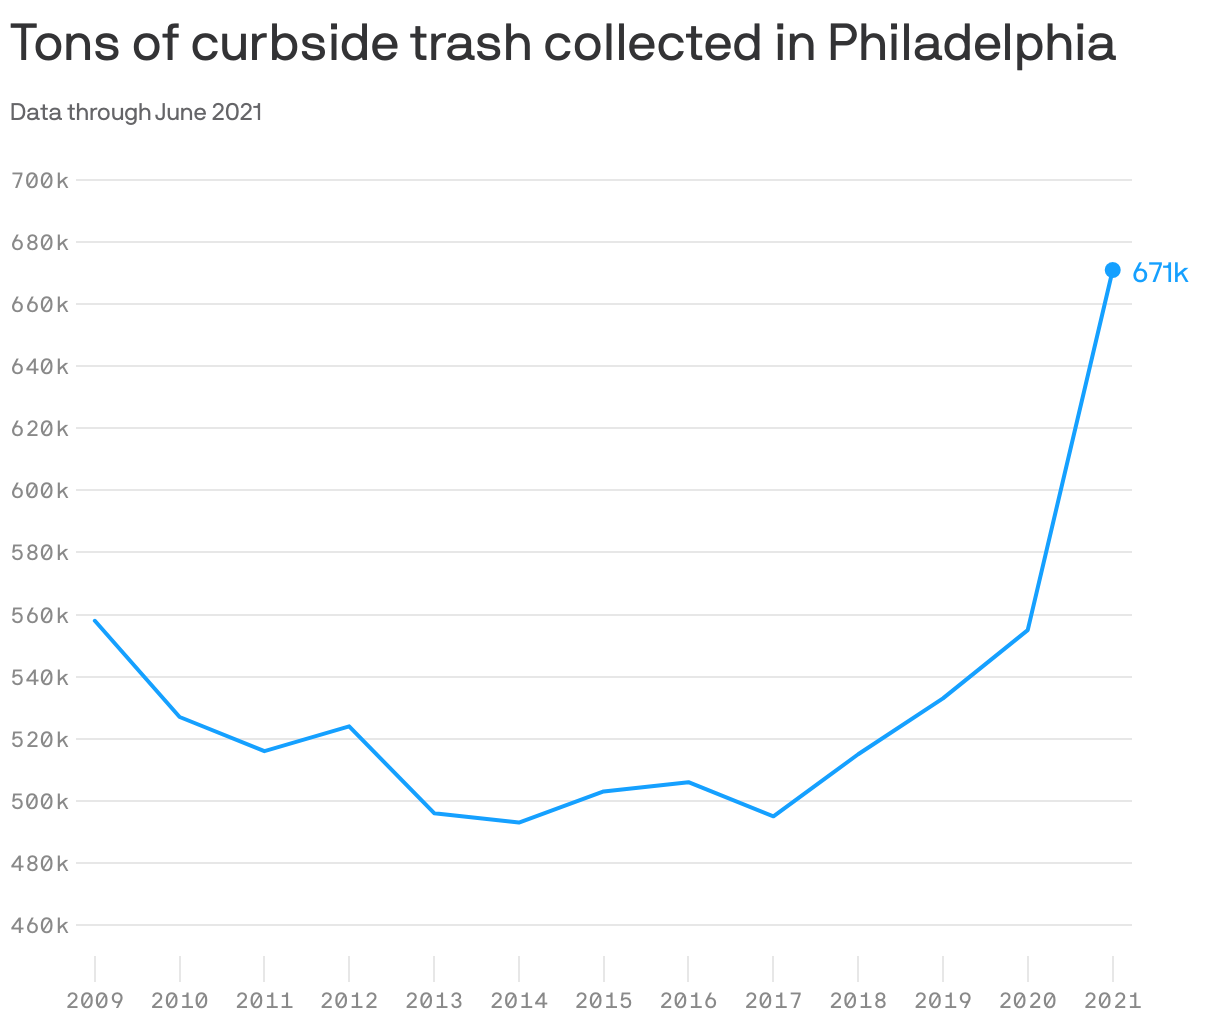 Tons of curbside trash collected in Philadelphia